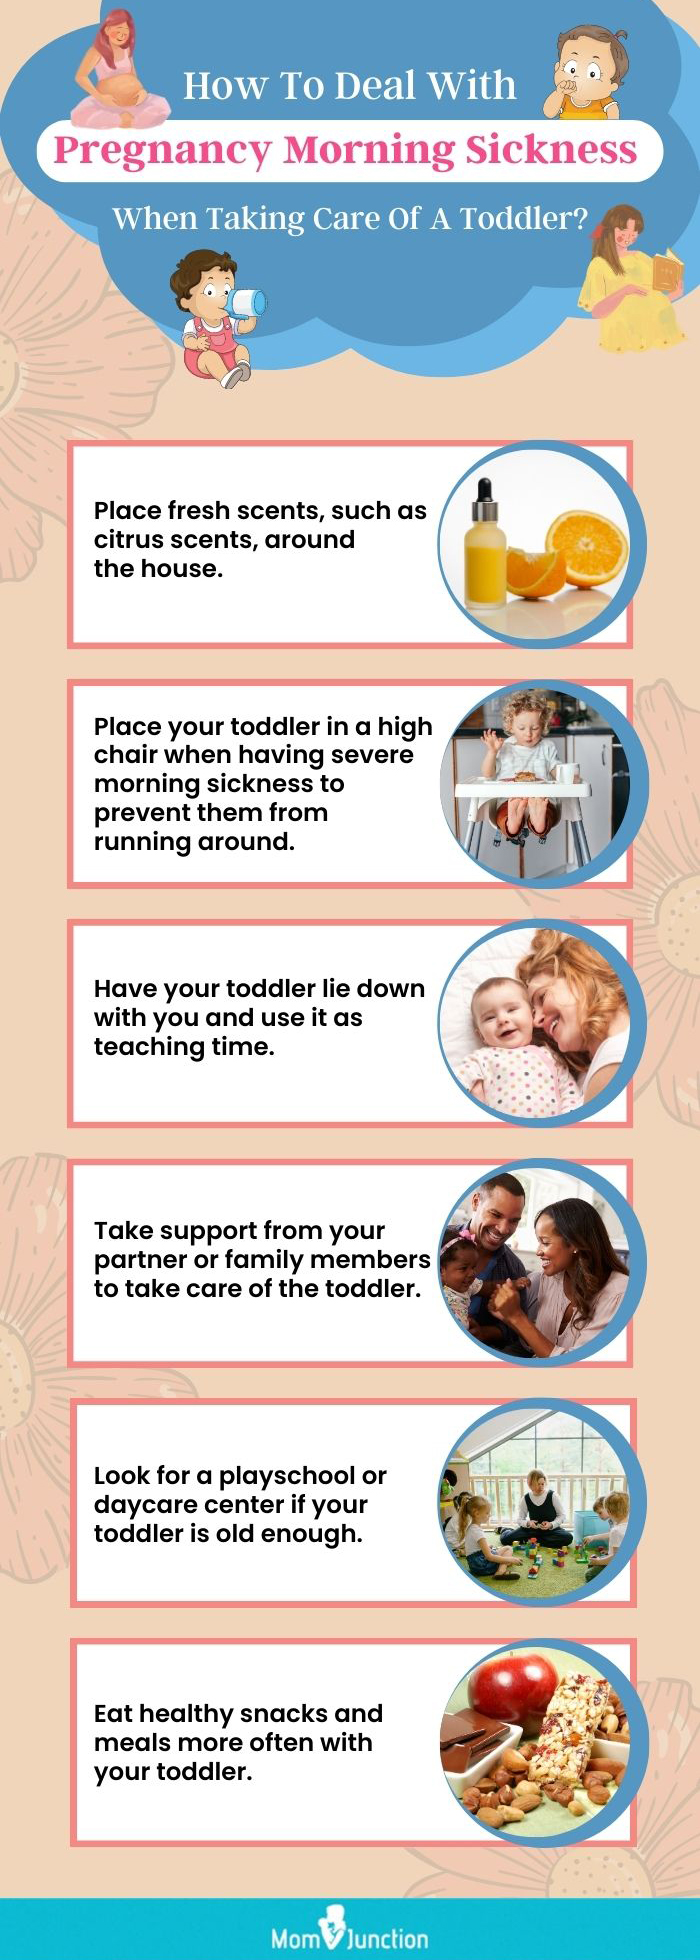 how to deal with pregnancy morning sickness when taking care of a toddler (infographic)